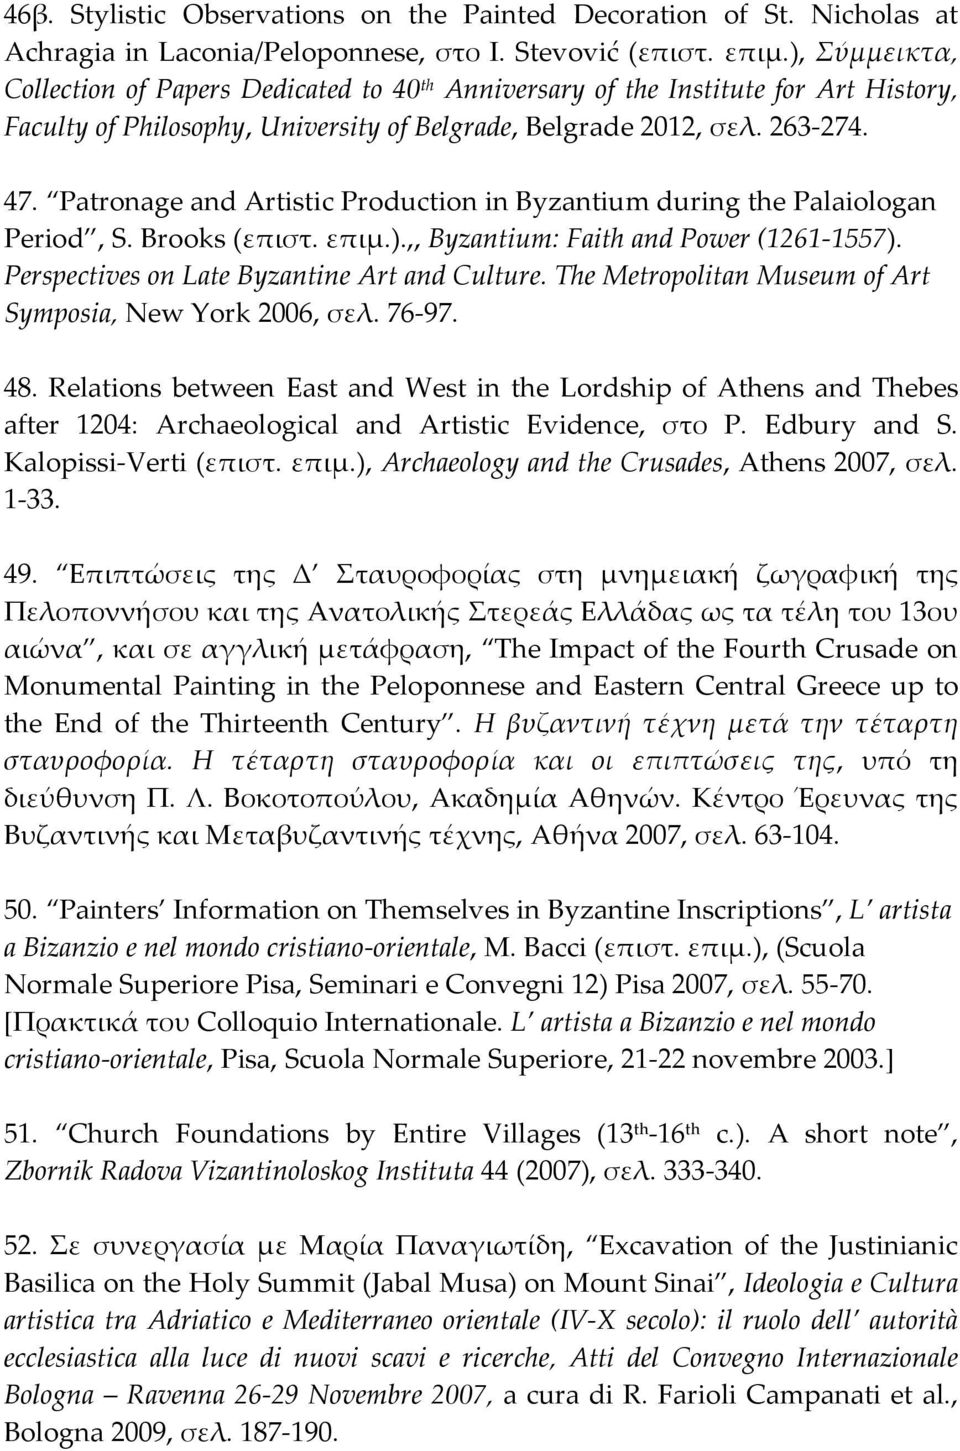 Patronage and Artistic Production in Byzantium during the Palaiologan Period, S. Brooks (επιστ. επιμ.).,, Byzantium: Faith and Power (1261-1557). Perspectives on Late Byzantine Art and Culture.